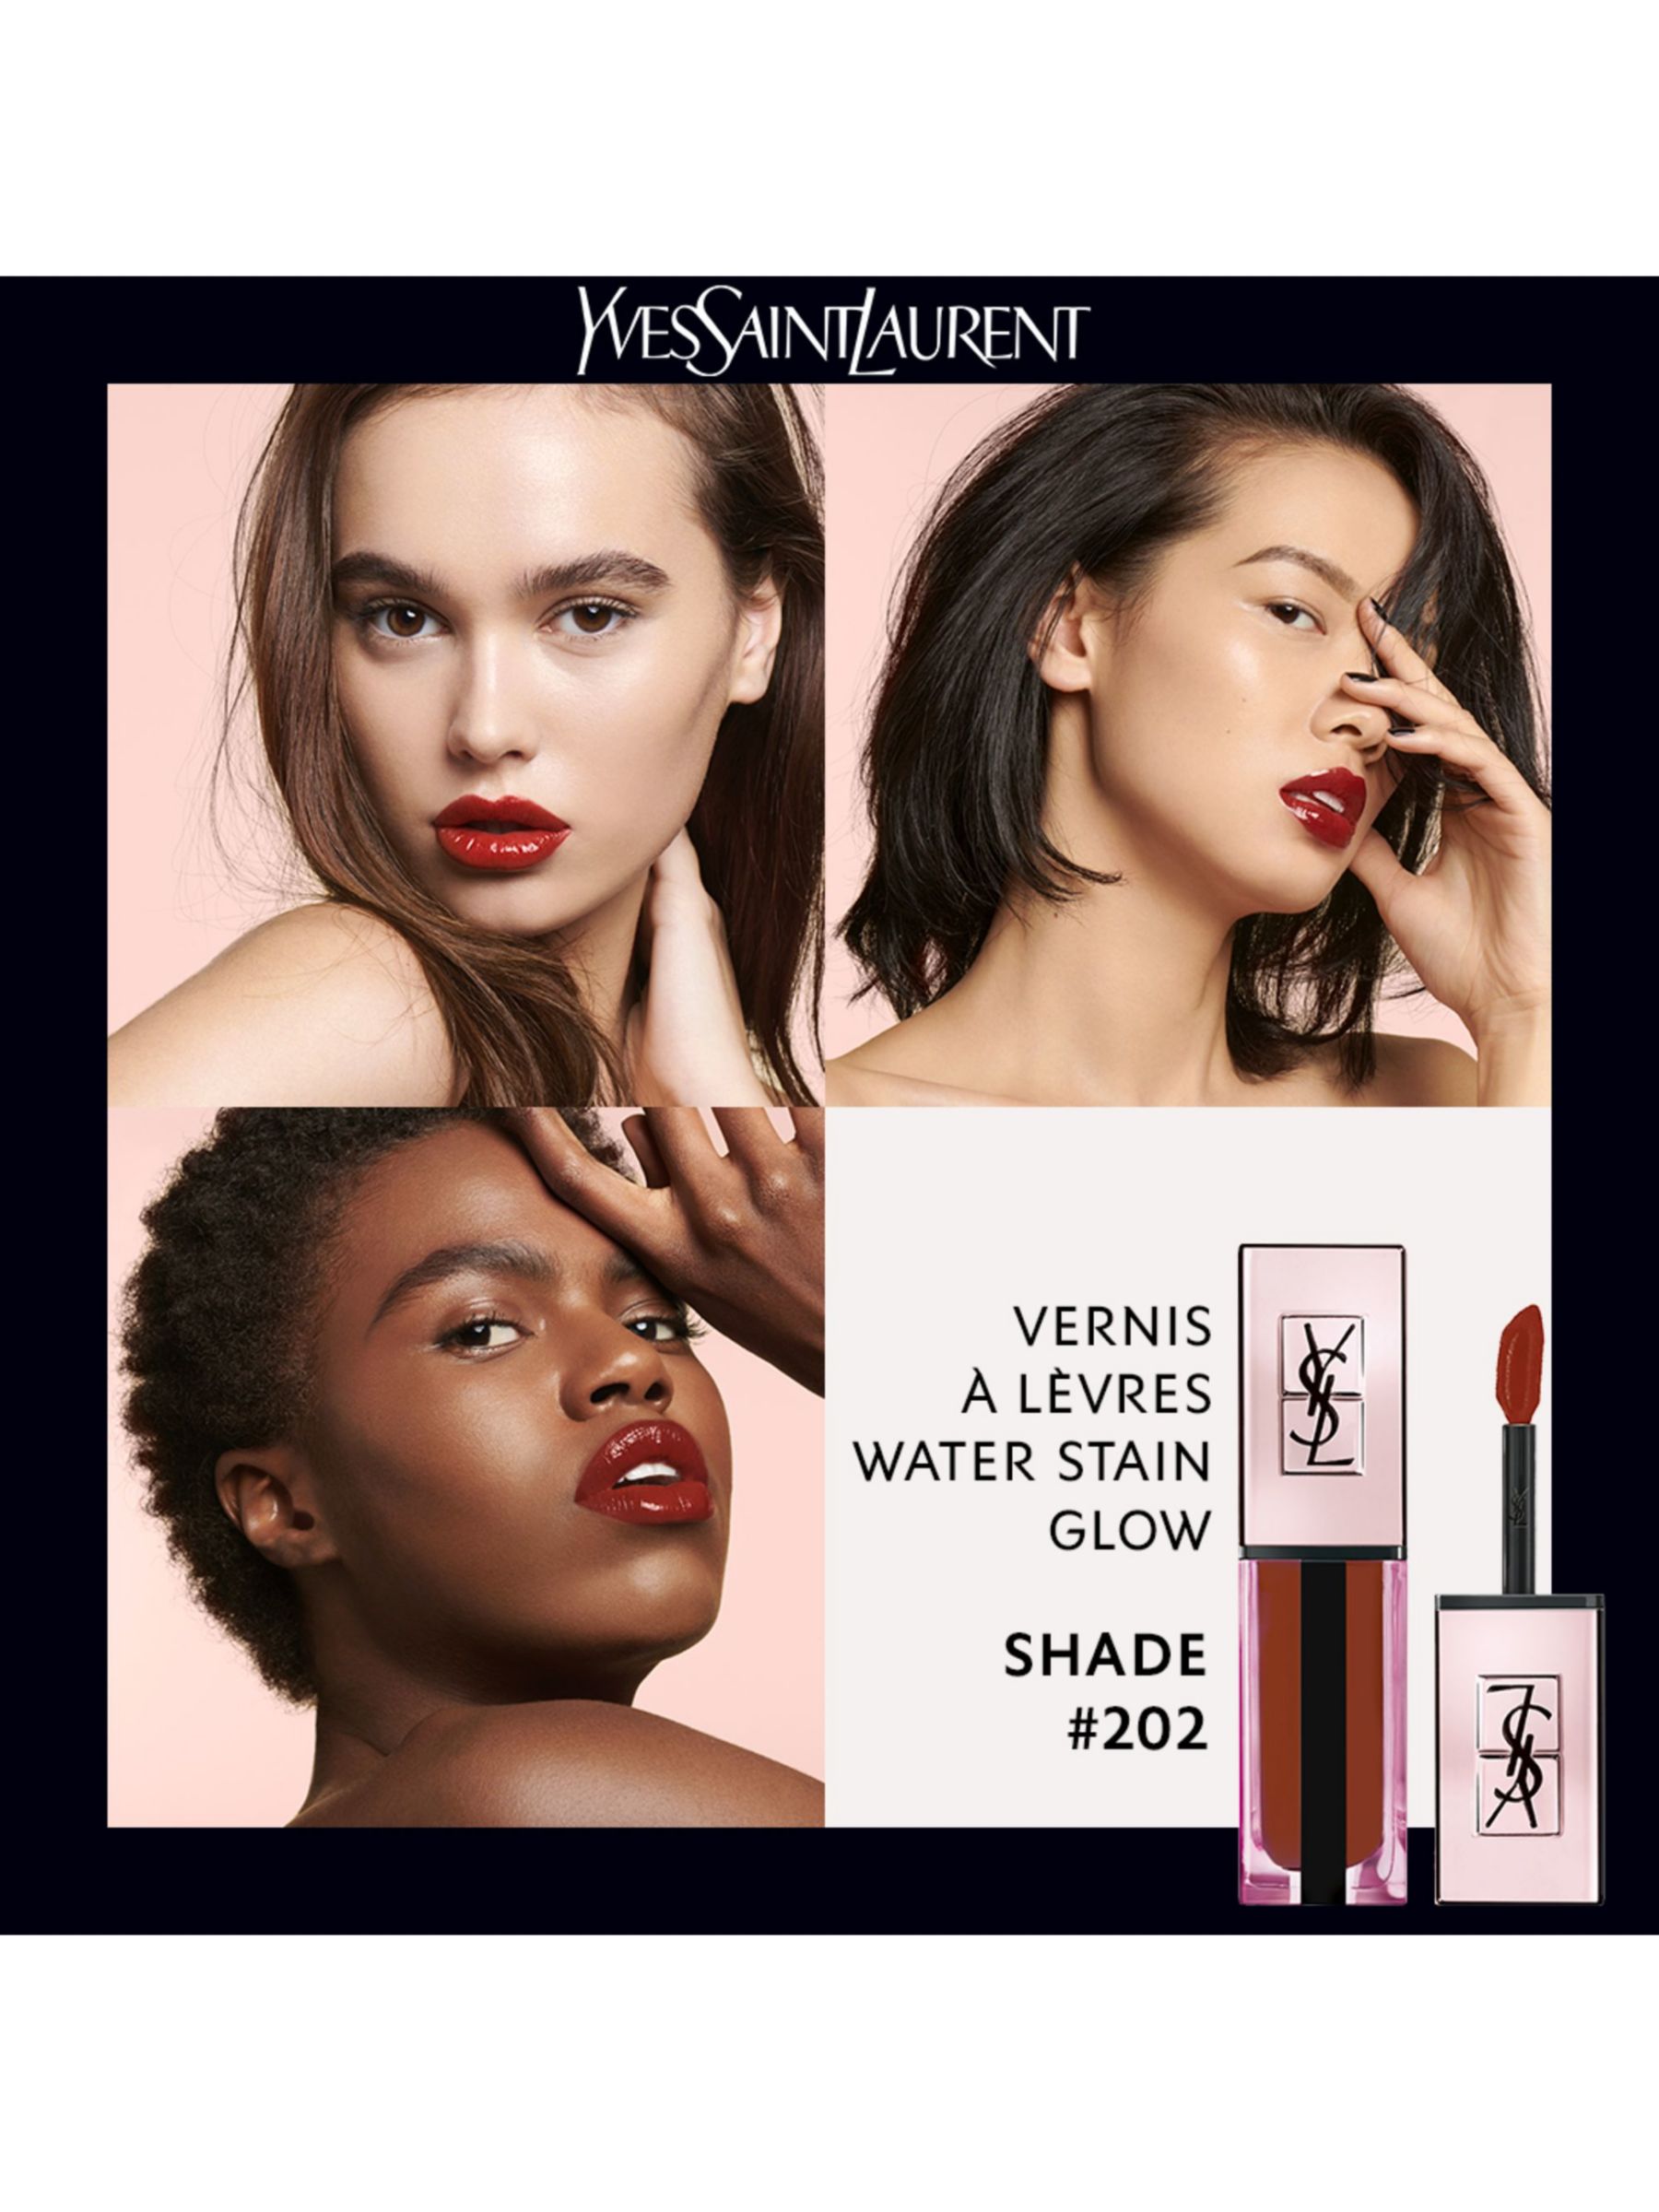 Yves Saint Laurent Rouge Pur Couture The Slim Glow Matte Lipstick, 202 Radical Red